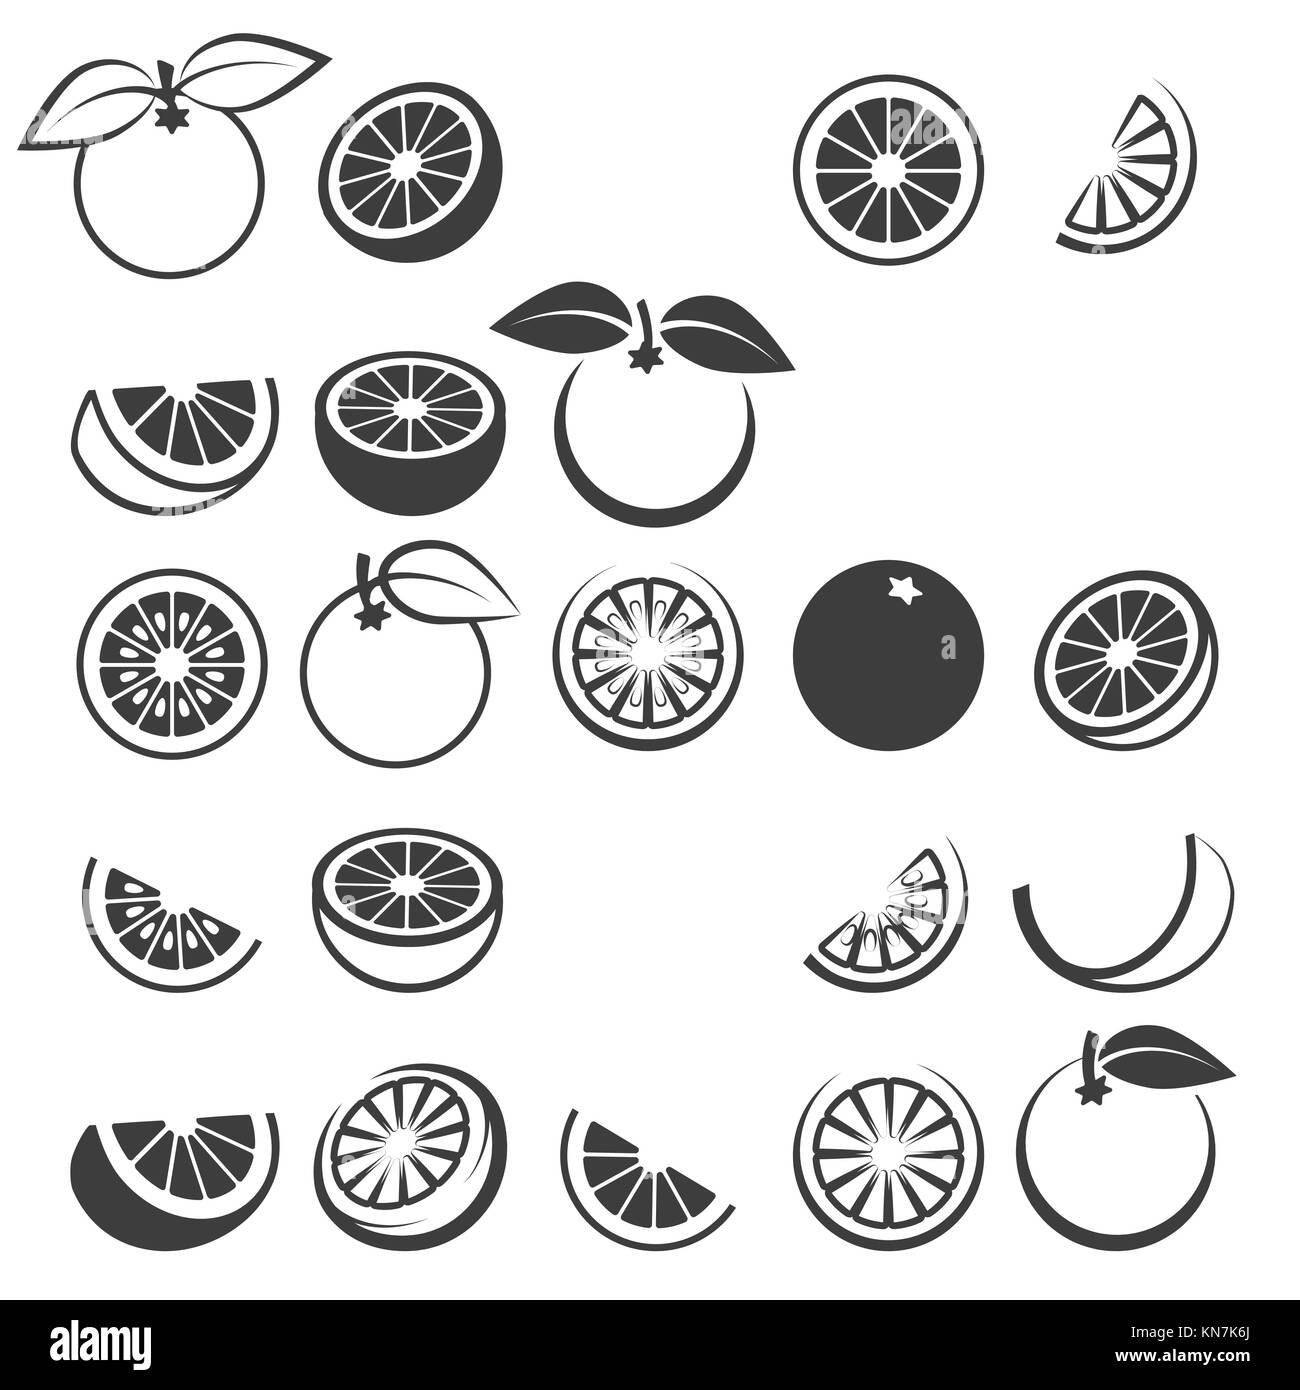 Orange icons. Tasty fresh vector black oranges fruits isolated on white background, citrus wedge, half and slices silhouette set Stock Vector